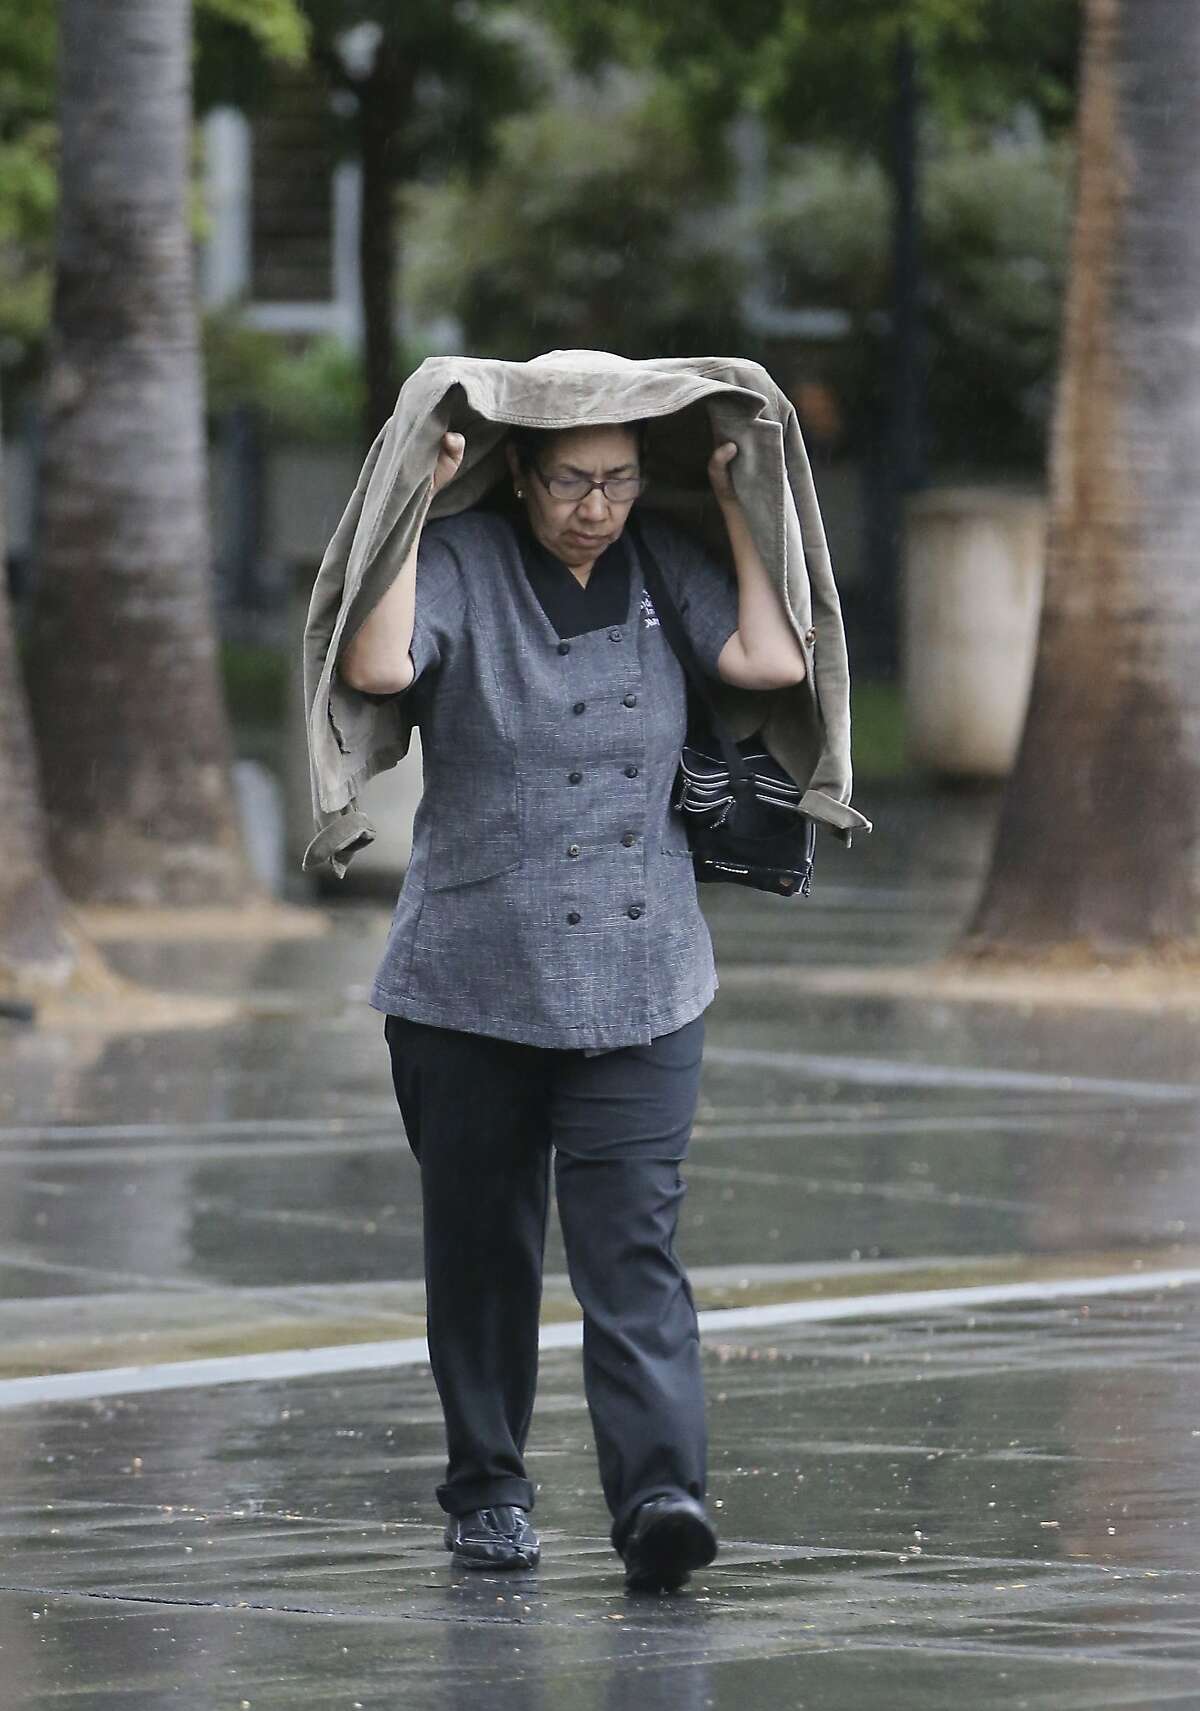 A woman covers her head during the first rain of autumn in Sacramento, Calif., Thursday, Sept. 25, 2014. While the brief storm is not expected to do much to improve the drought situation in California, it is welcome relief by fire fighters battling the King fire that has burned more than 90,000 acres in the nearby Sierra Nevada foothills.